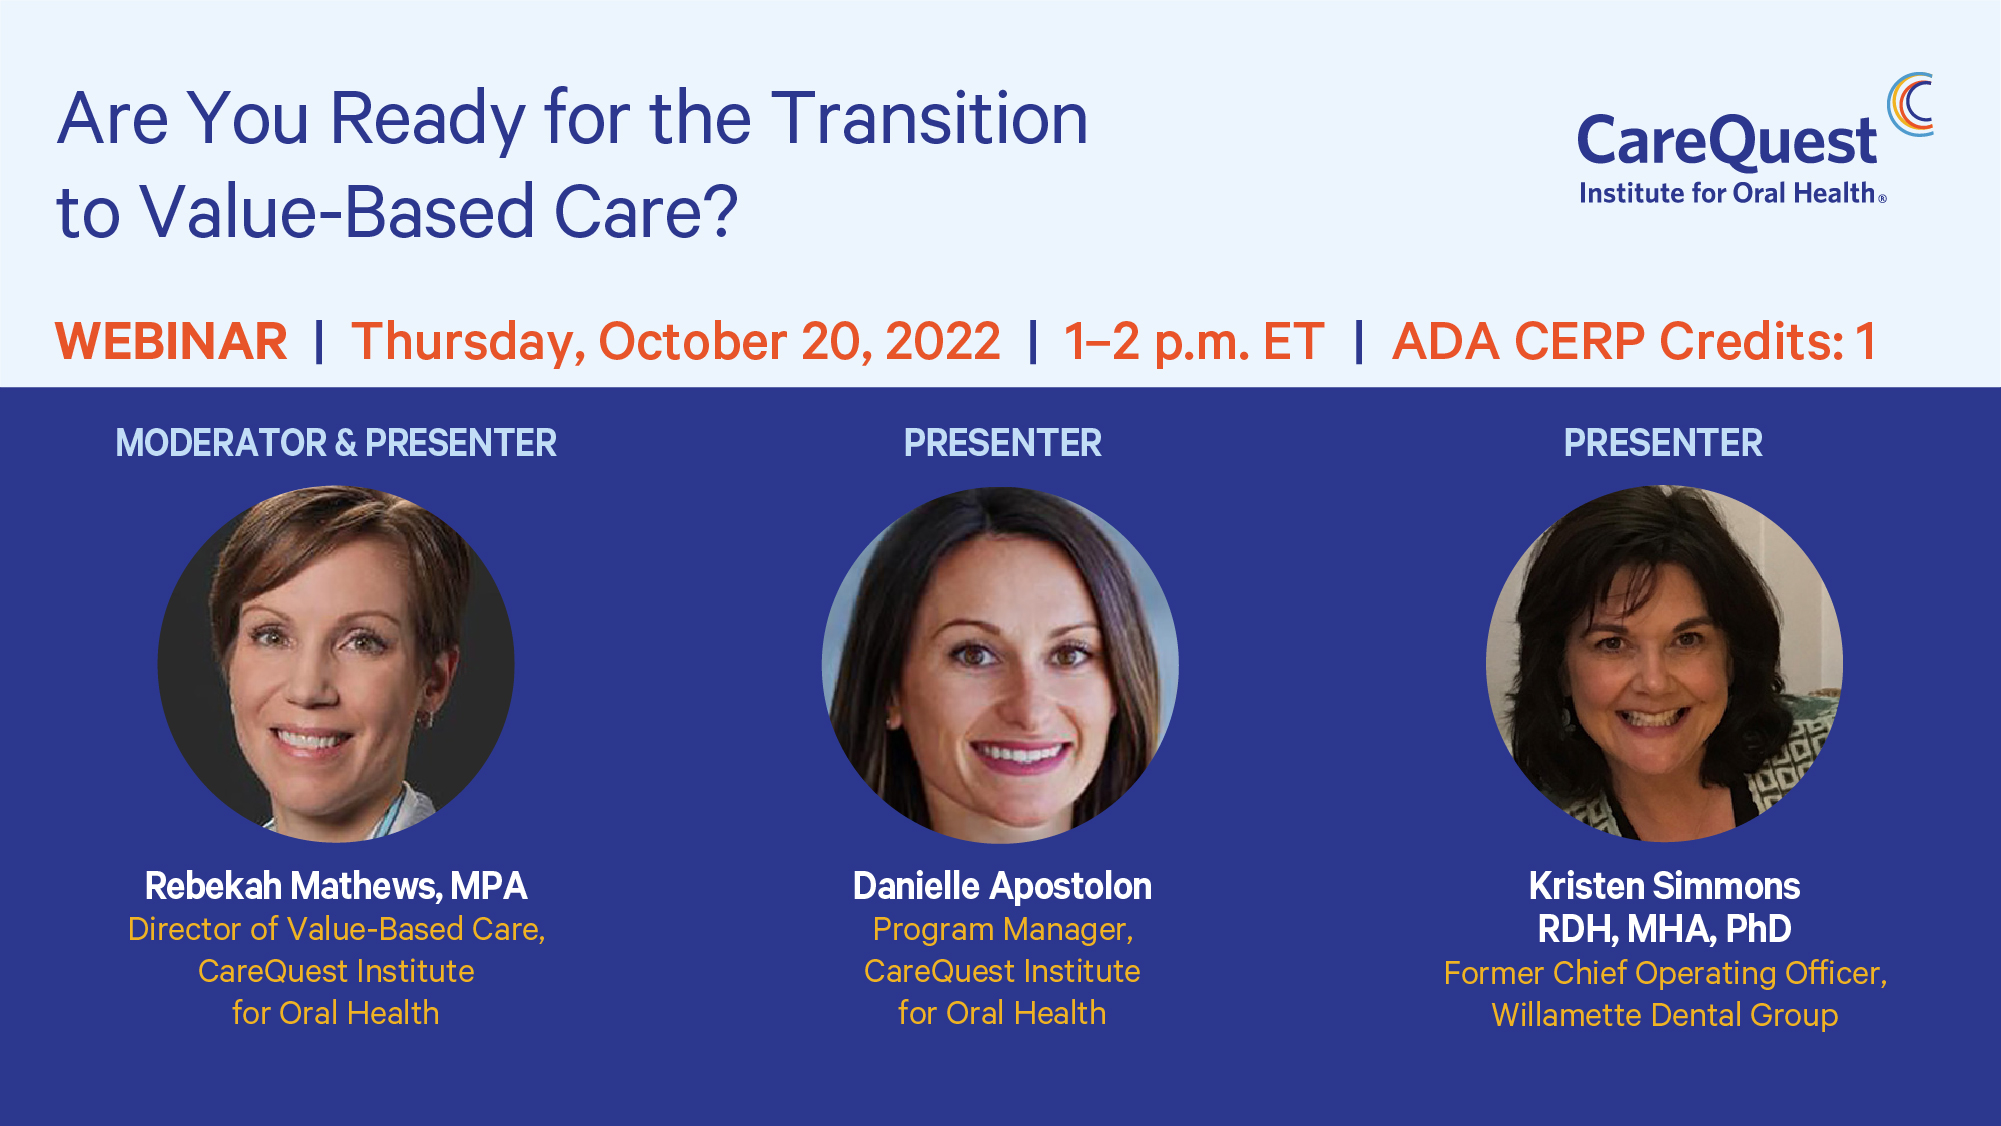 Are You Ready for the Transition to Value-Based Care?